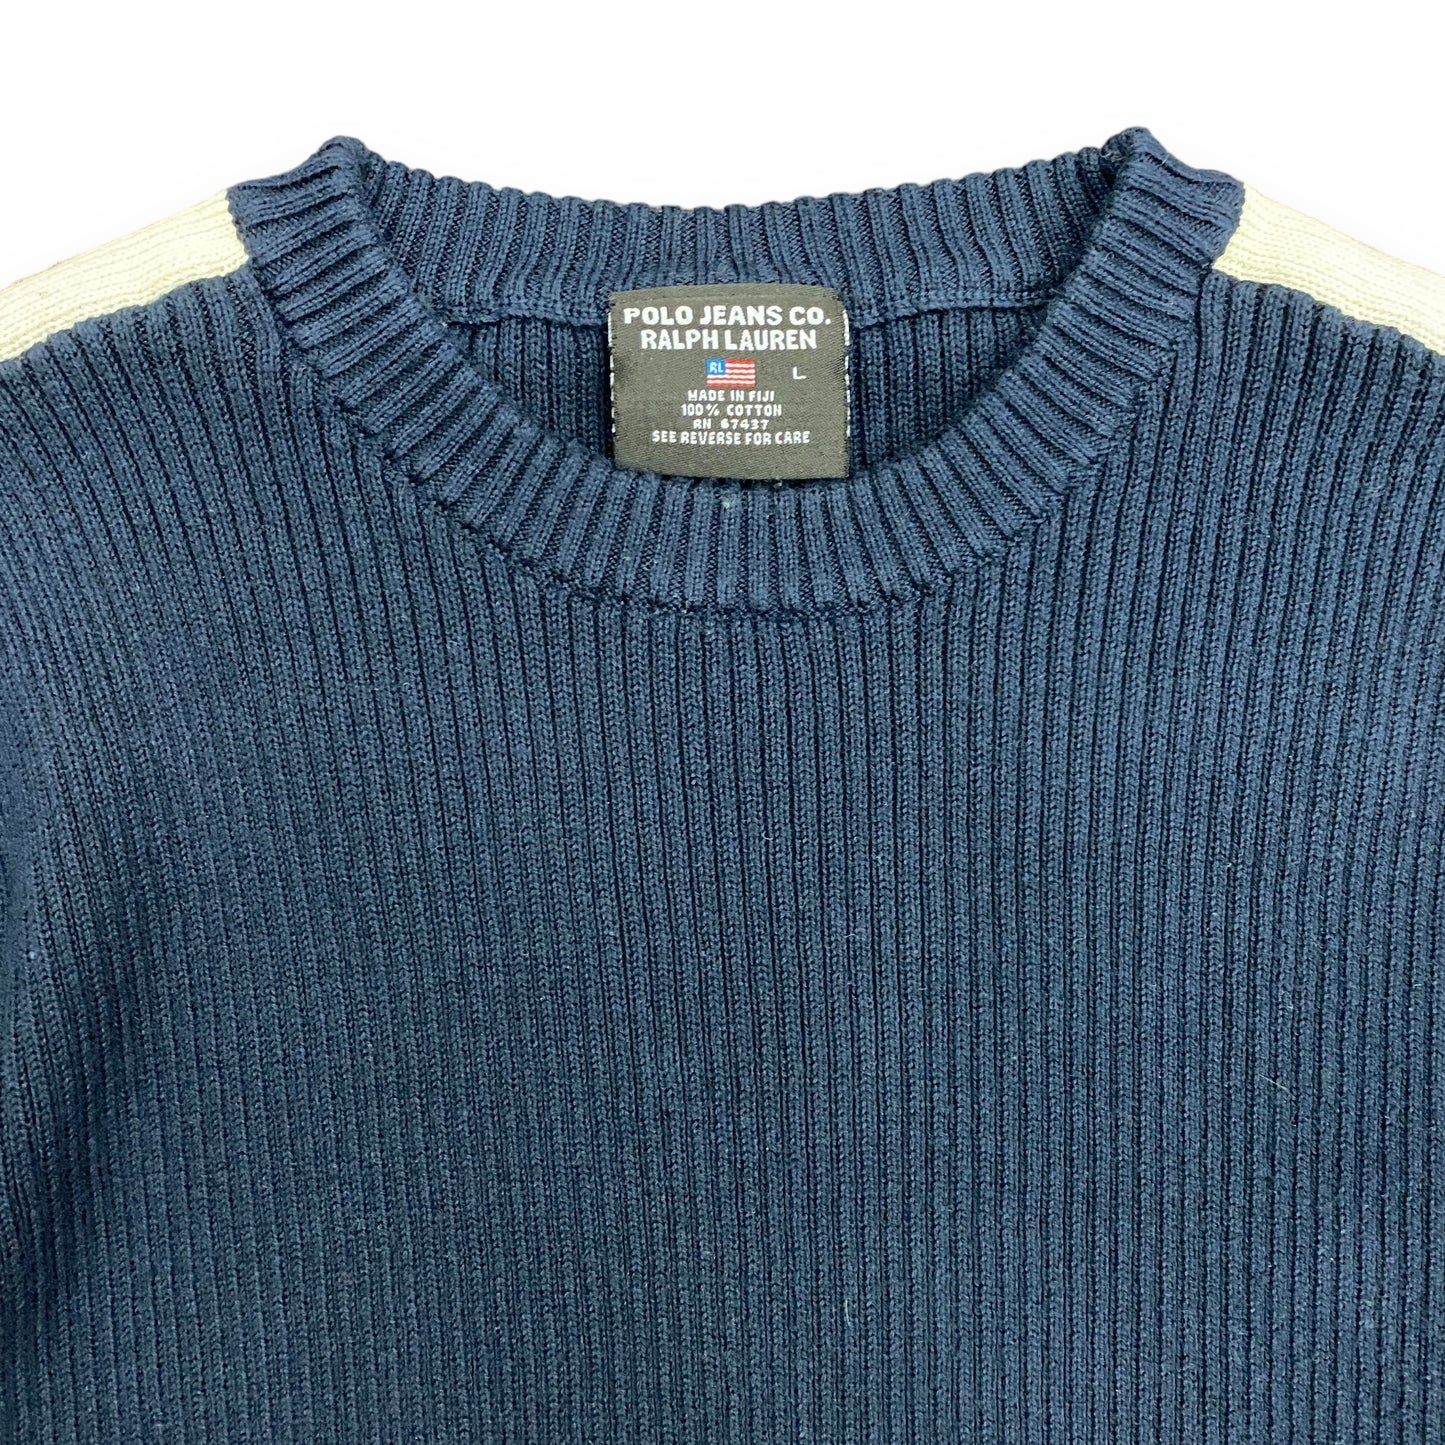 Polo Jeans Co. Ralph Lauren Ribbed Sweater - Size Large